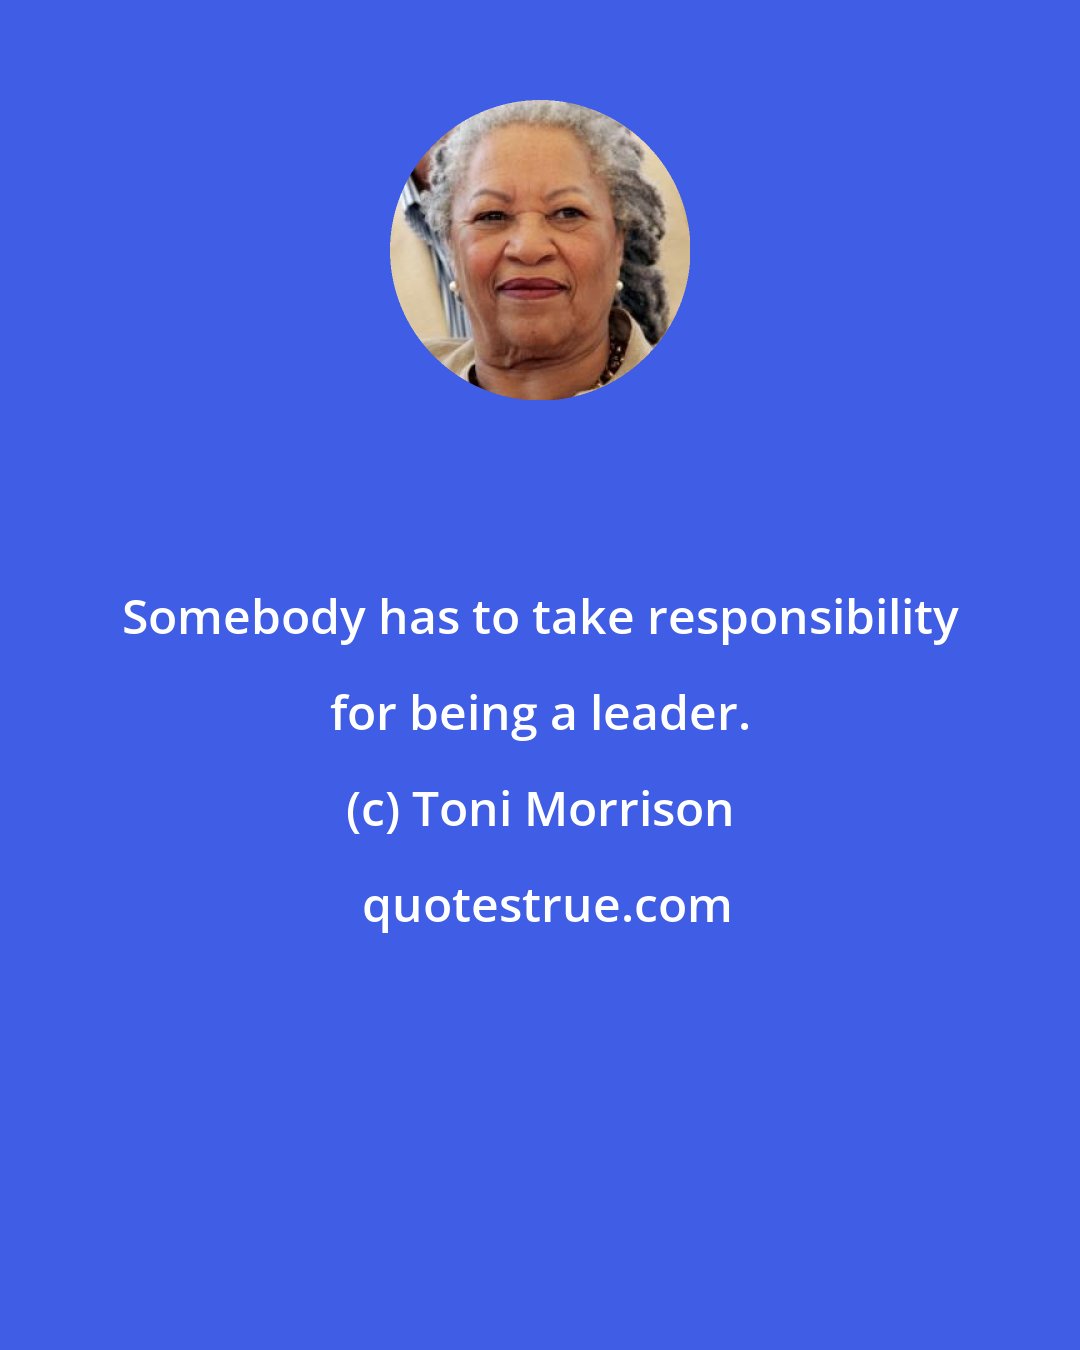 Toni Morrison: Somebody has to take responsibility for being a leader.